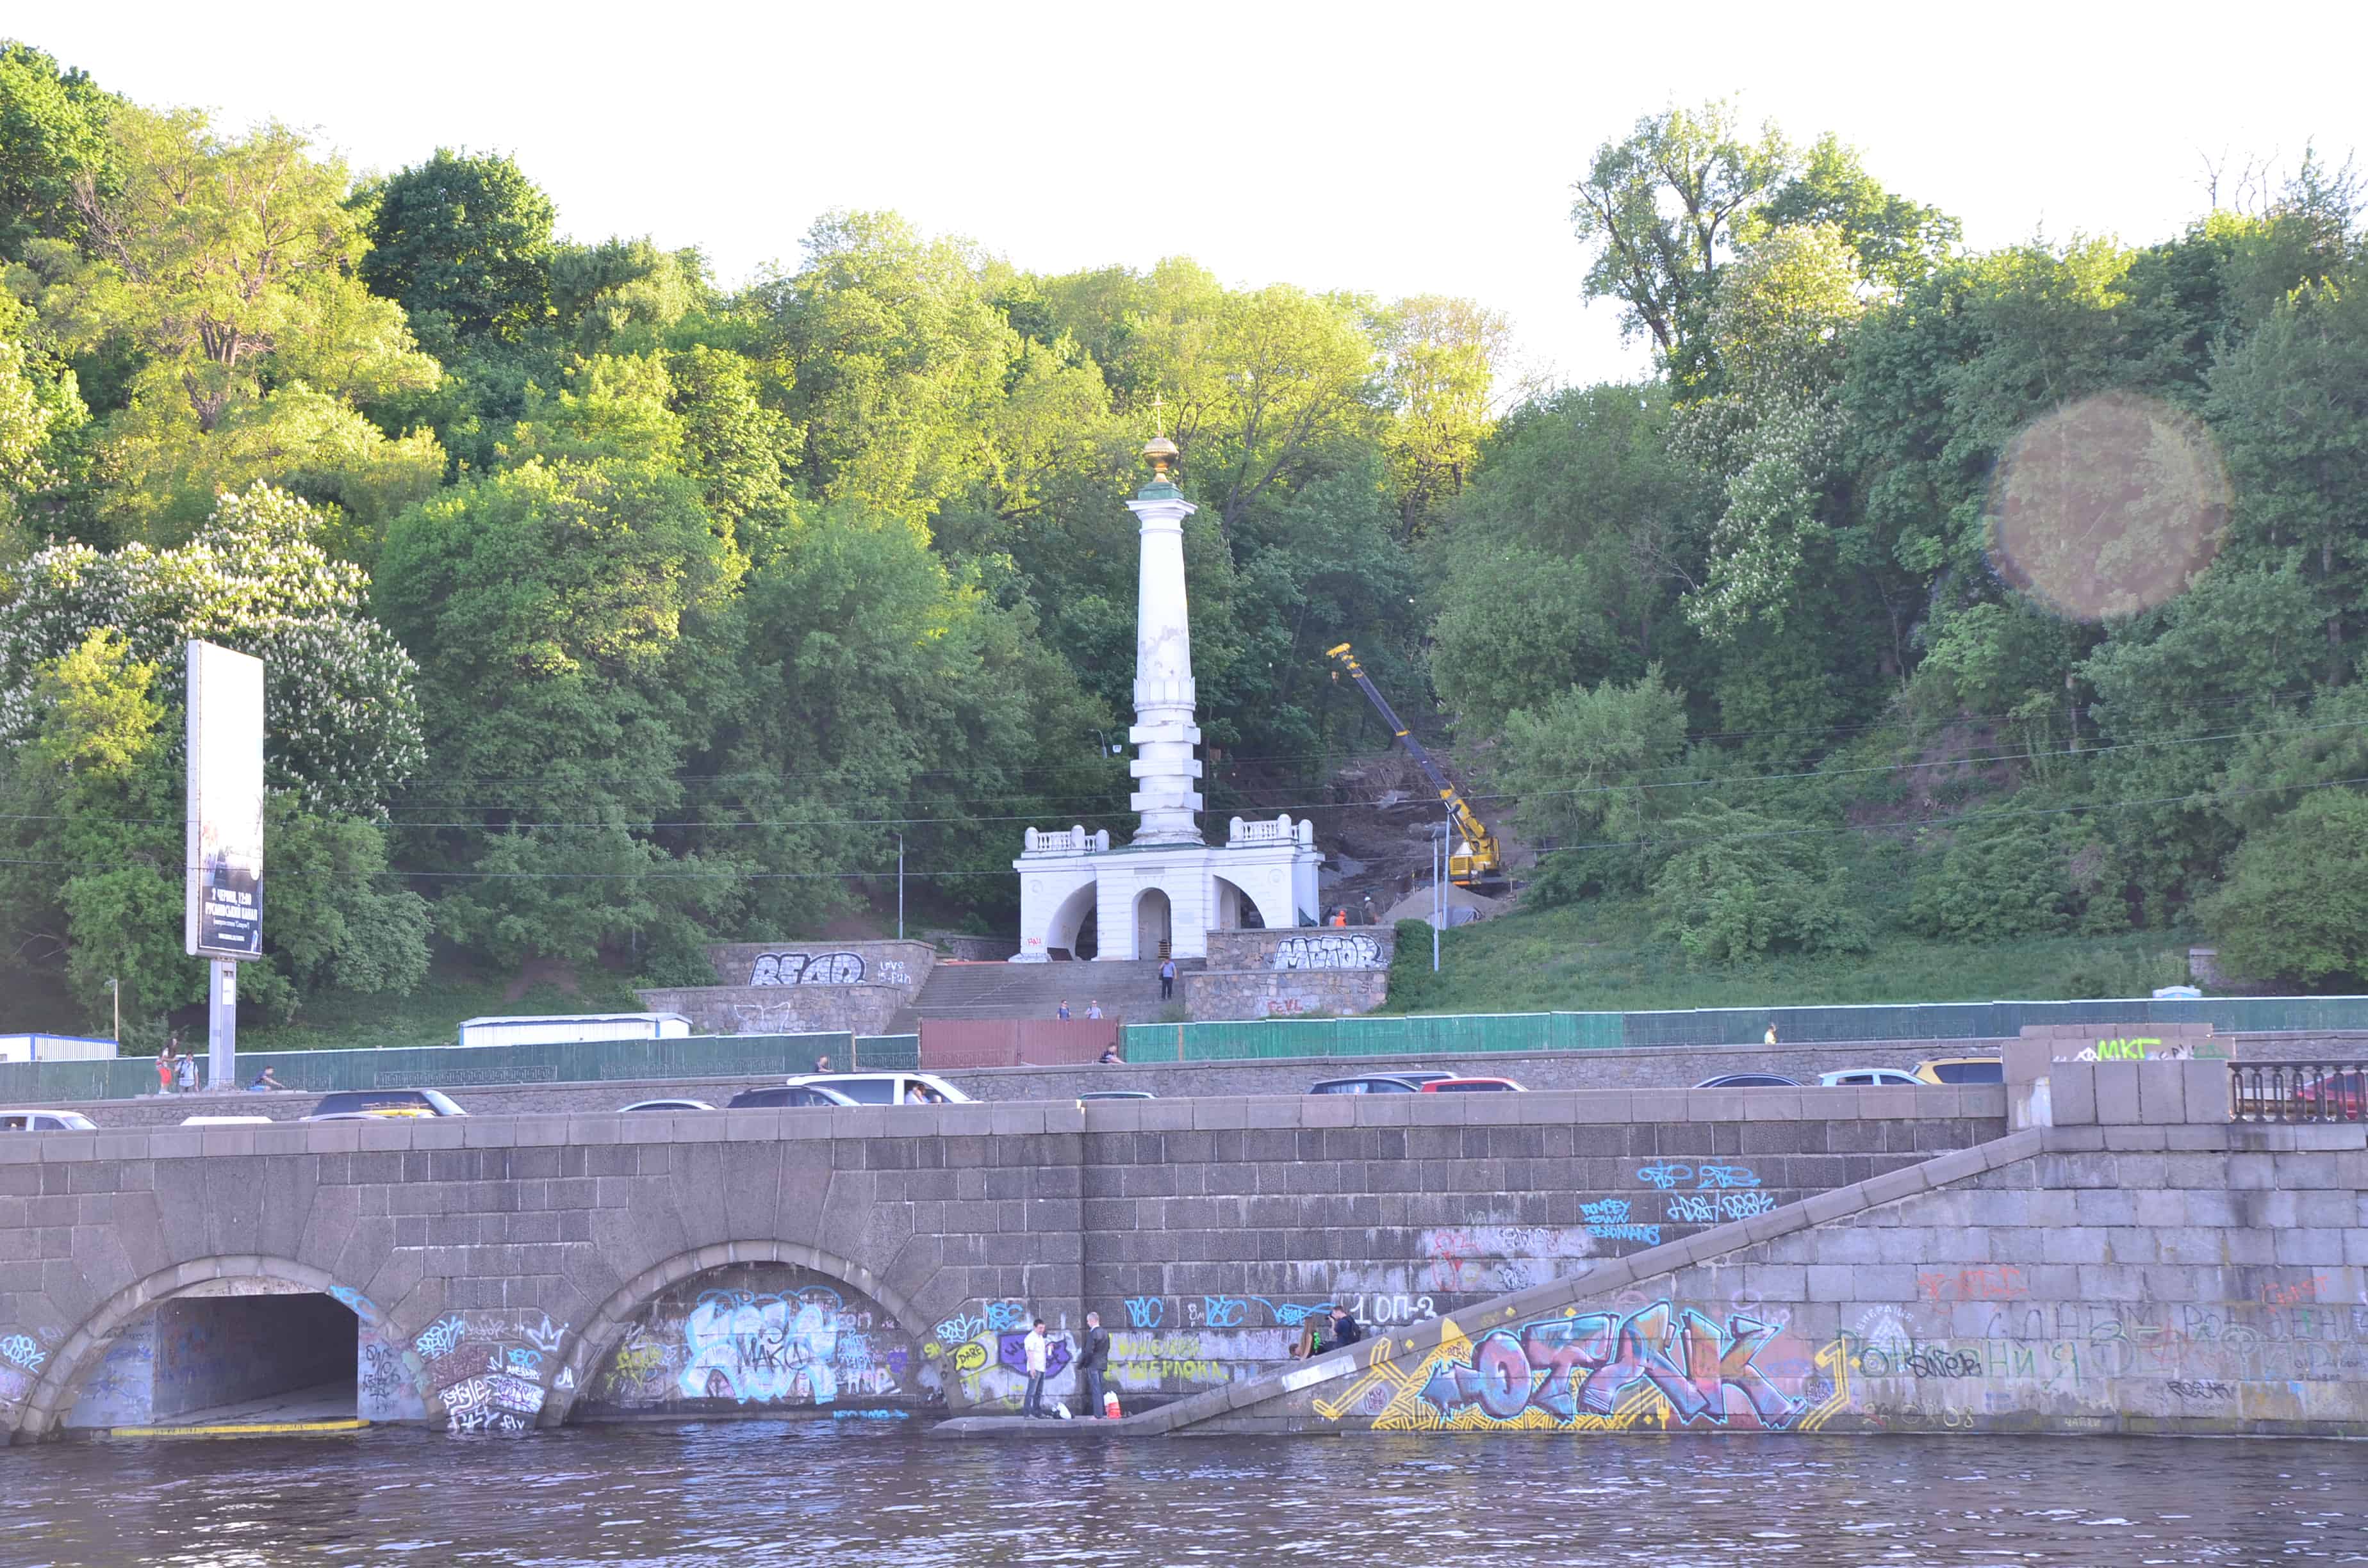 Pillar of the Magdeburg Rights on the Dnieper River cruise in Kyiv, Ukraine